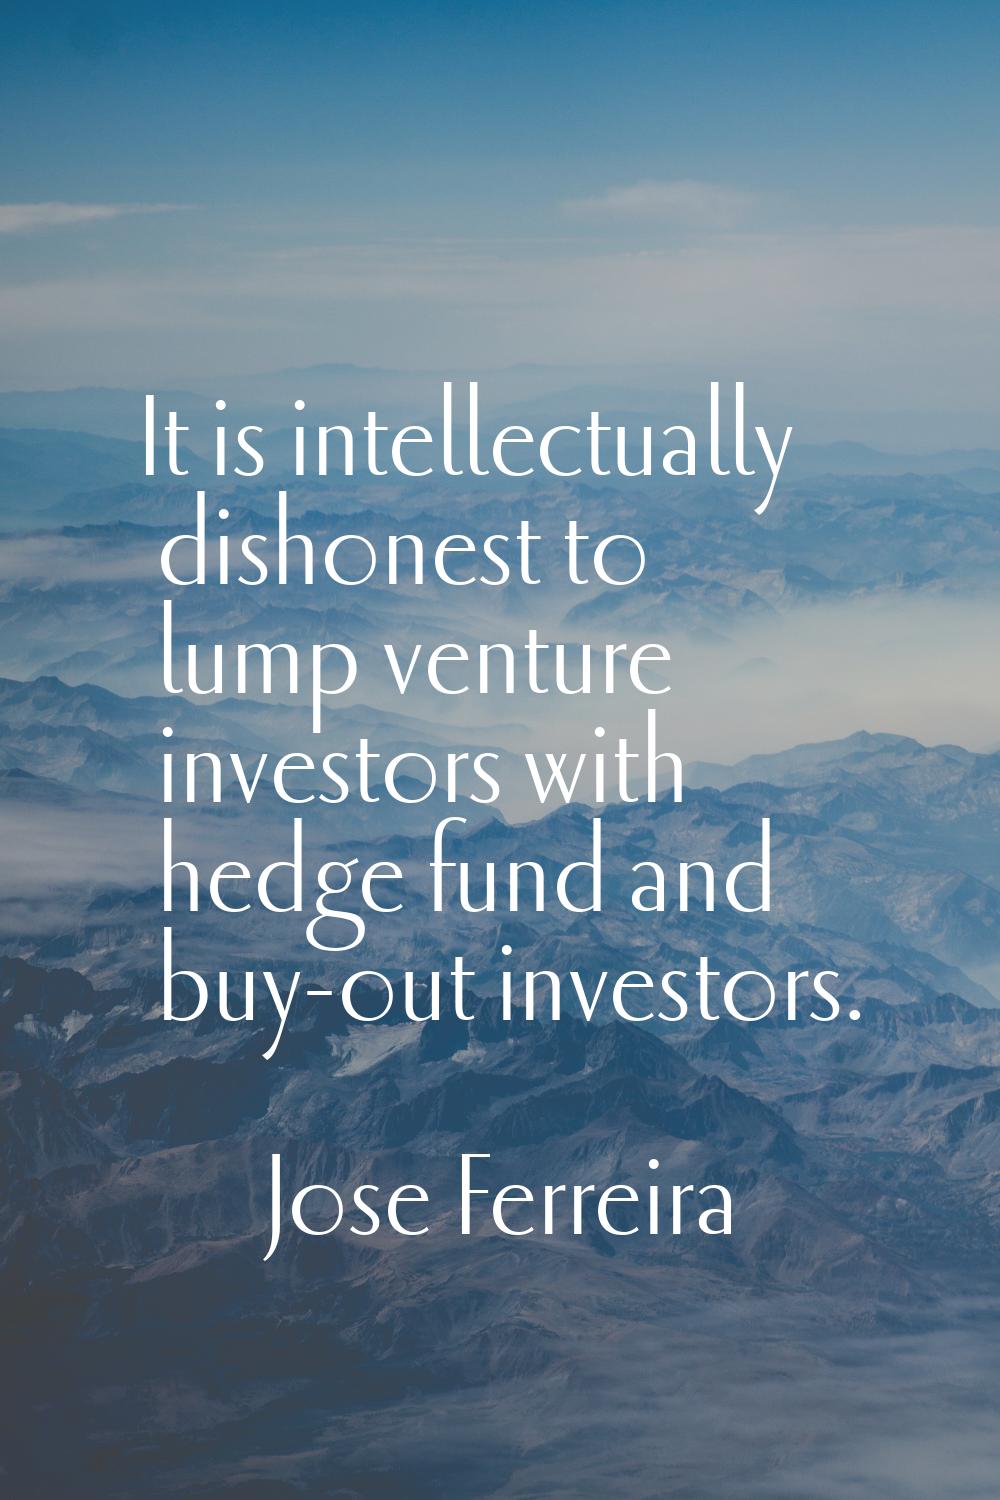 It is intellectually dishonest to lump venture investors with hedge fund and buy-out investors.